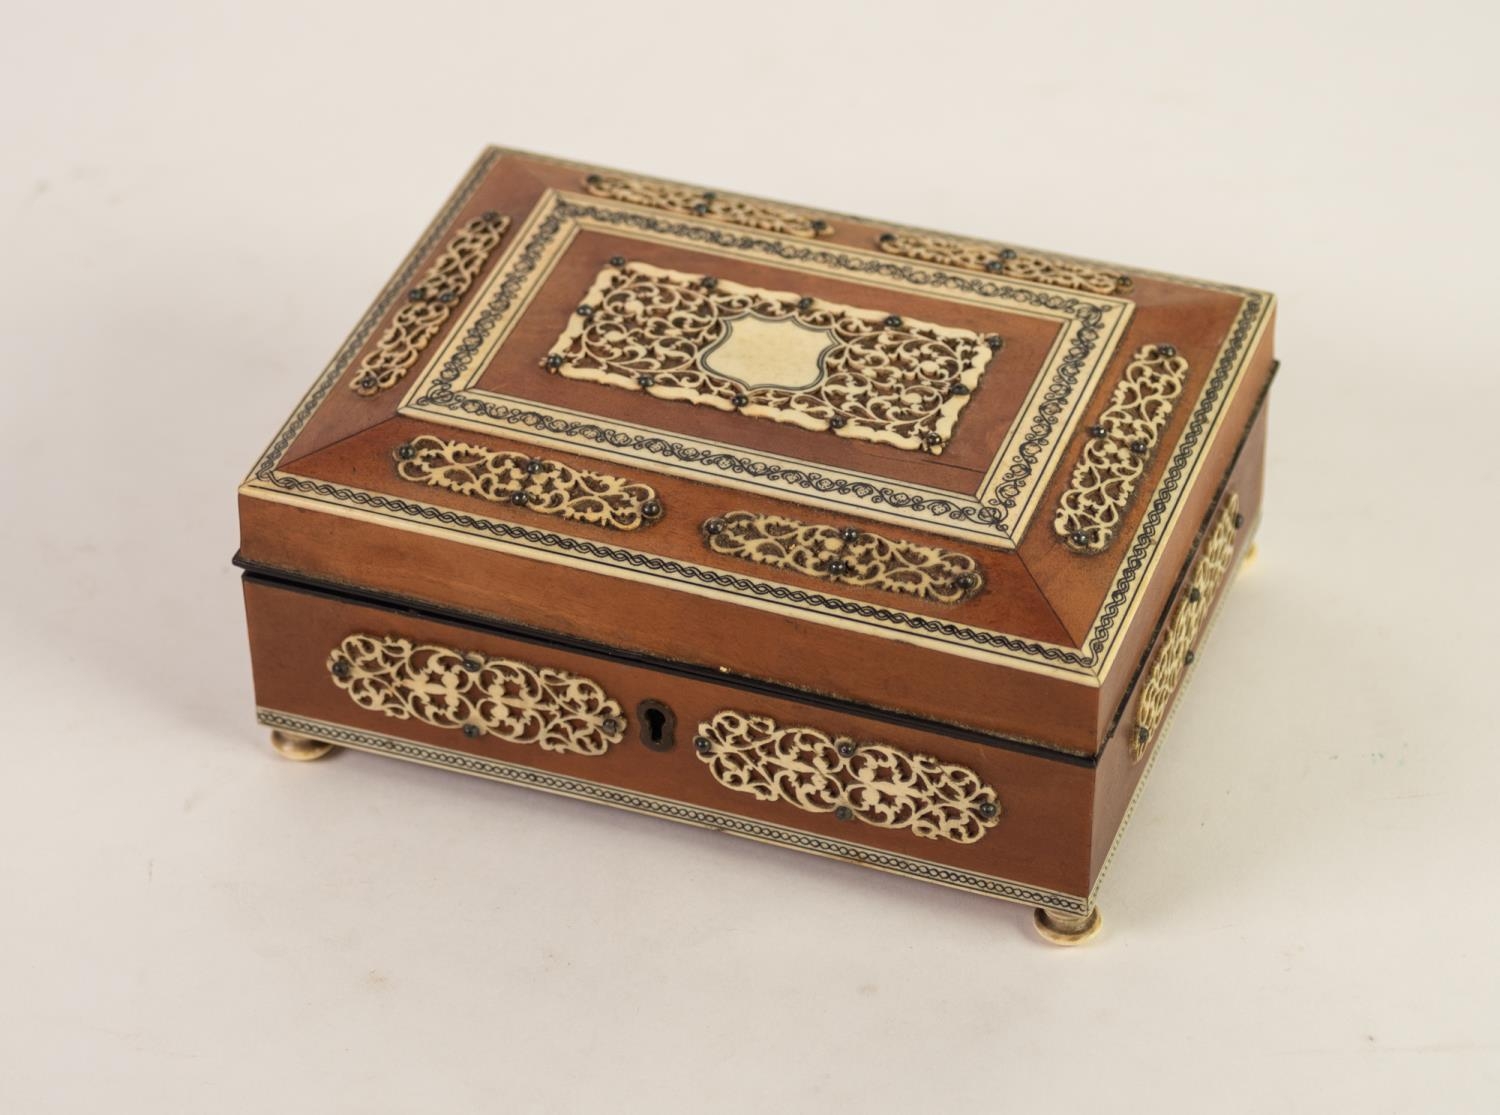 INDIAN SANDALWOOD PLAYING CARD OR TABLE CIGARETTE BOX with engraved wavy borders and applied pierced